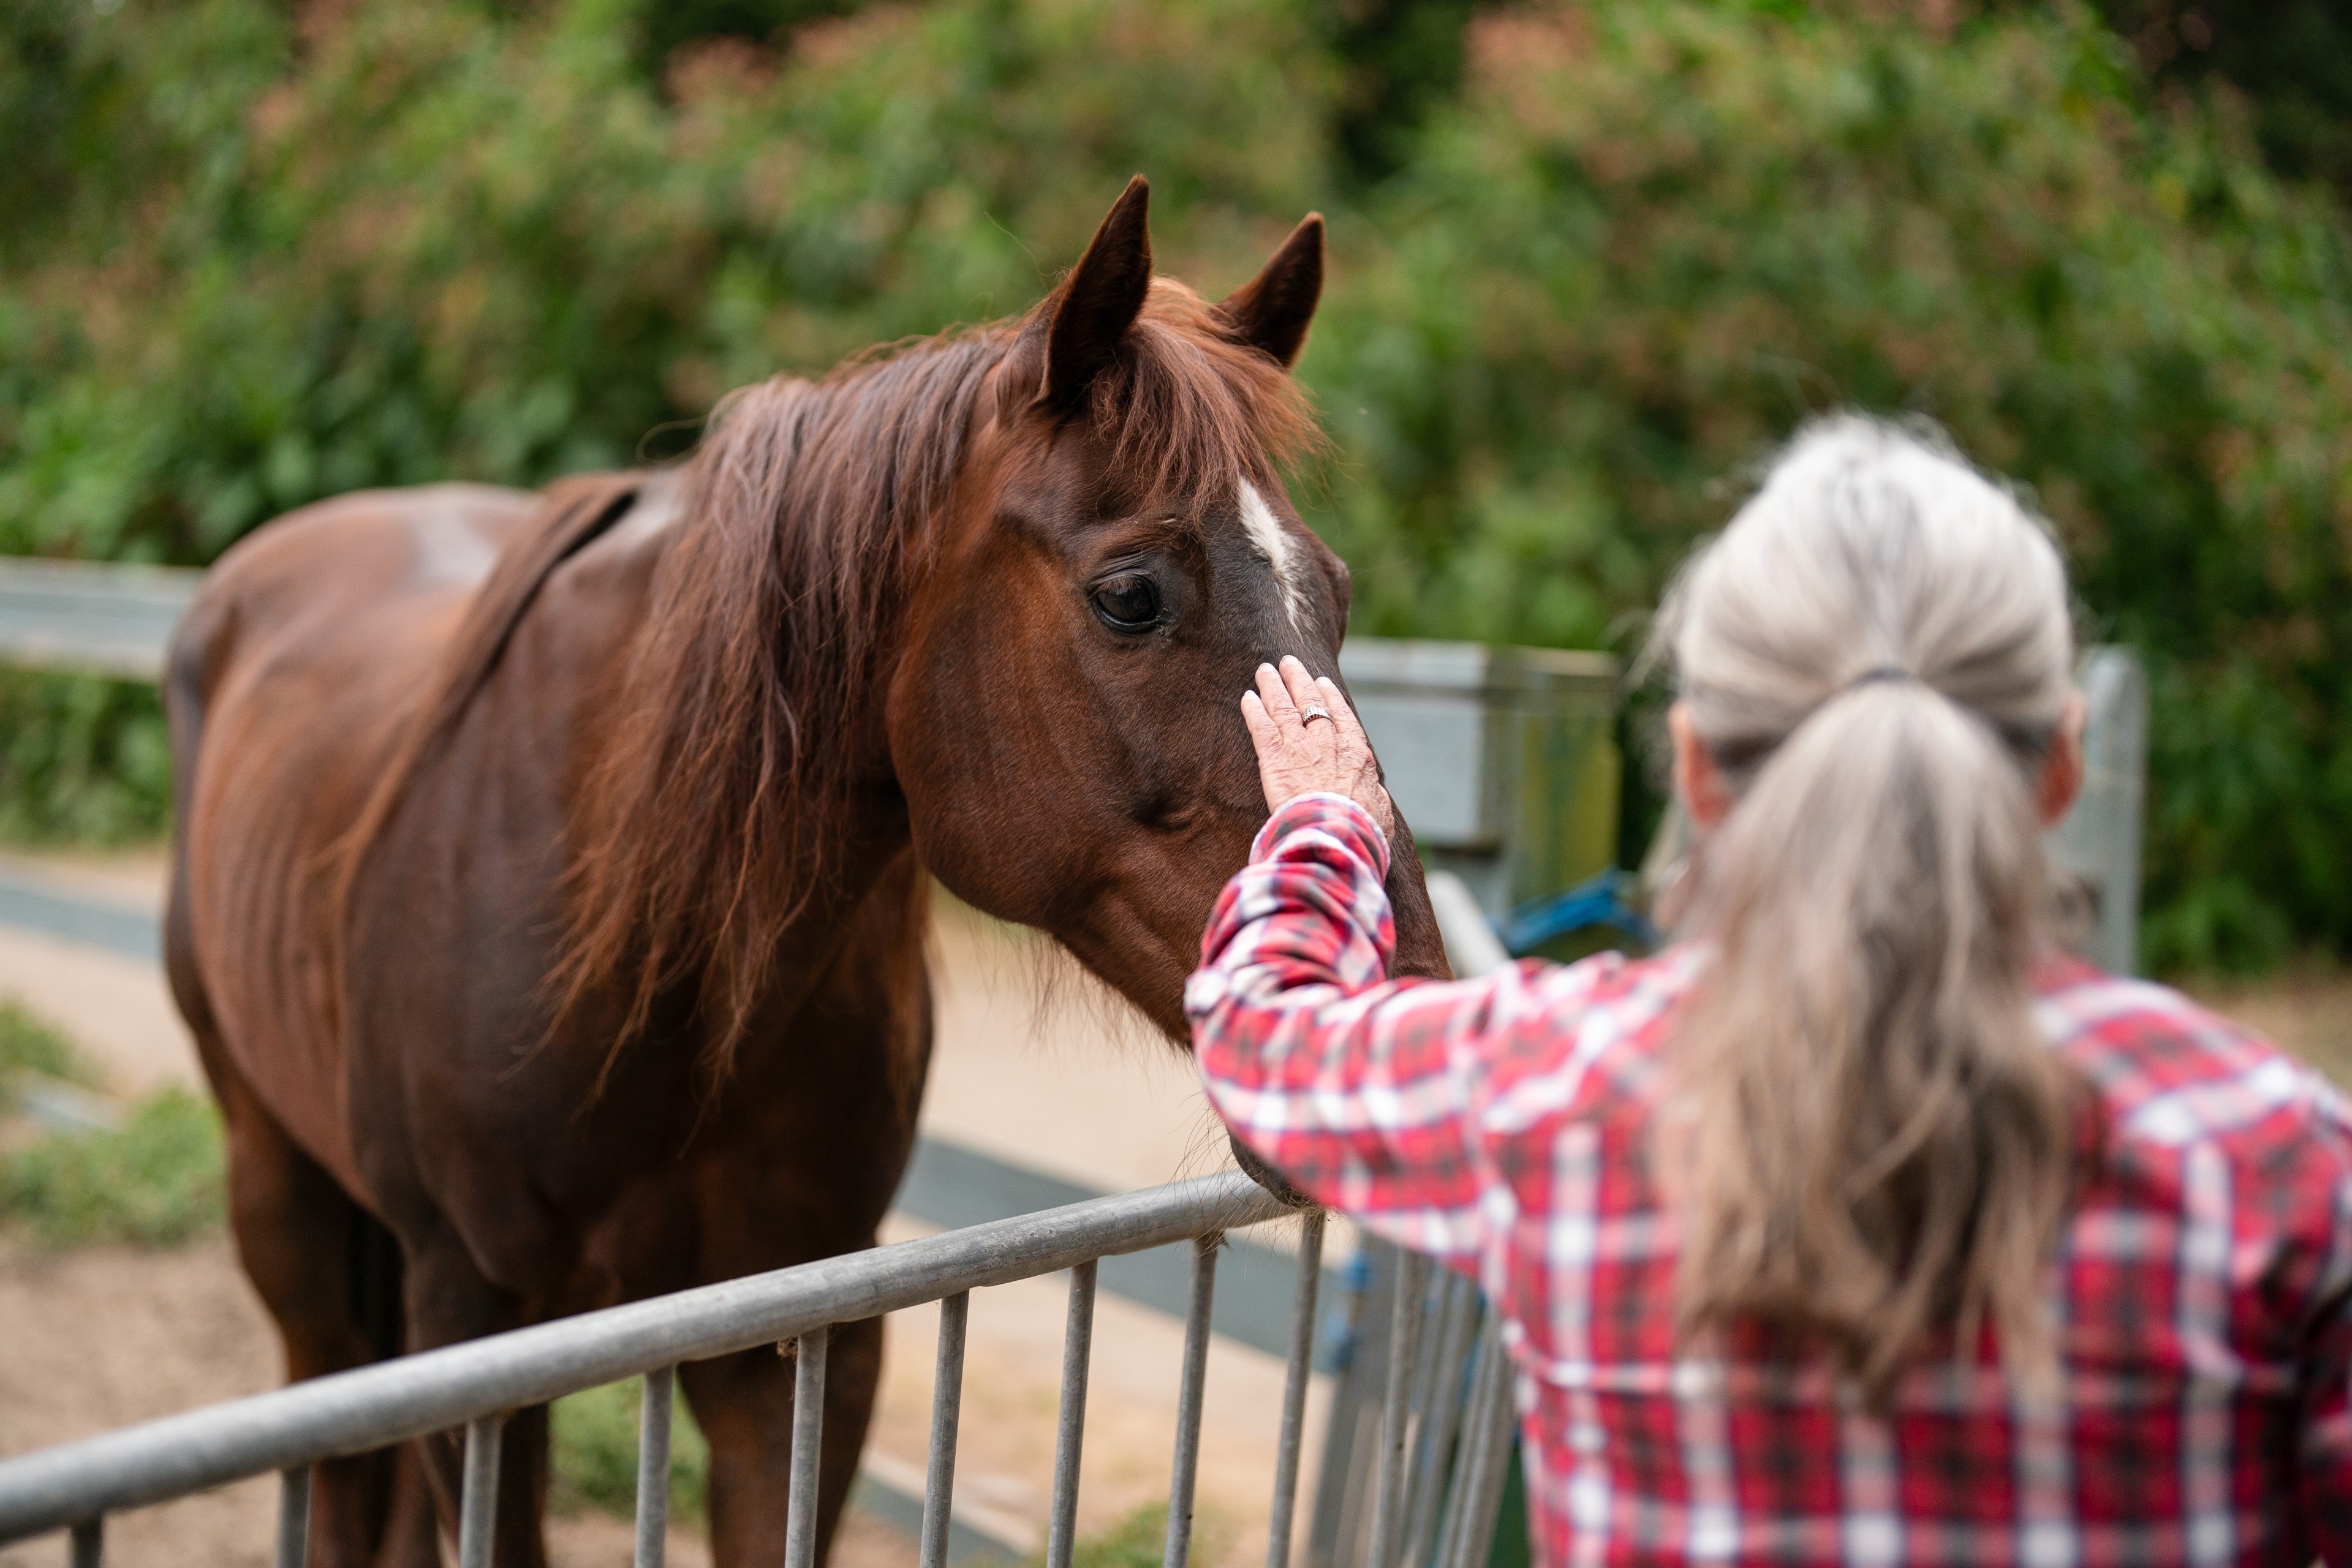 A woman in a red plaid shirt gently touches the nose of a brown horse with a white mark, standing by a fence in a lush green setting.